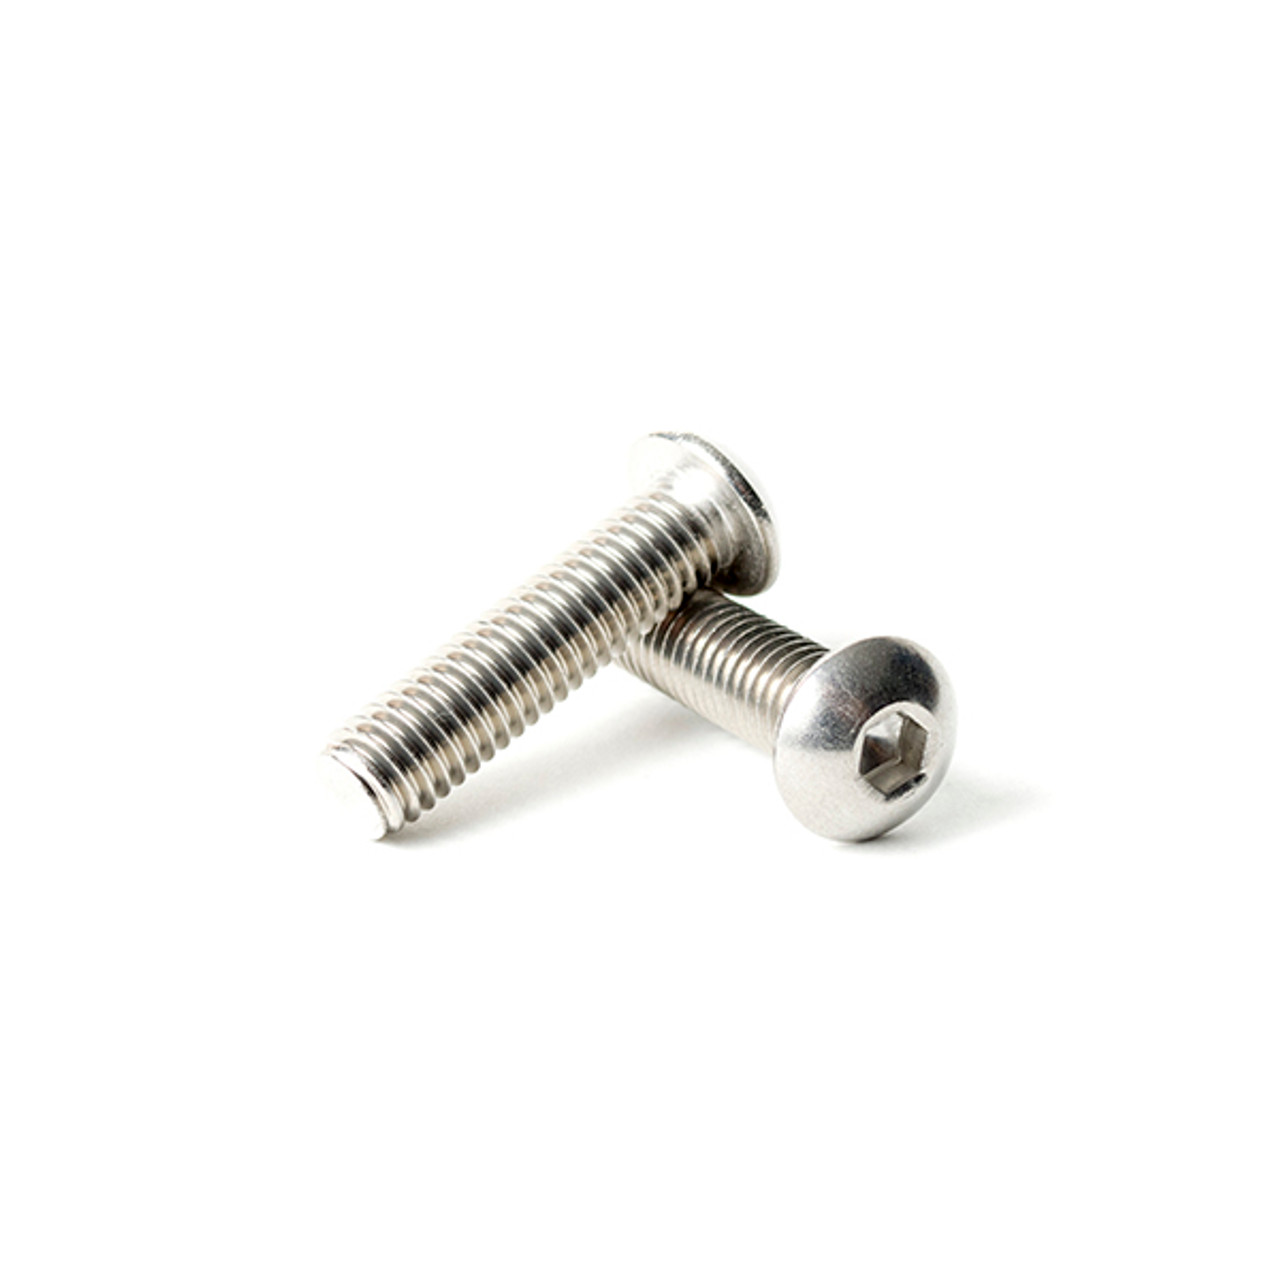 1/4-20 X 3/4 Button Socket Cap Screw 18-8 Stainless Steel The